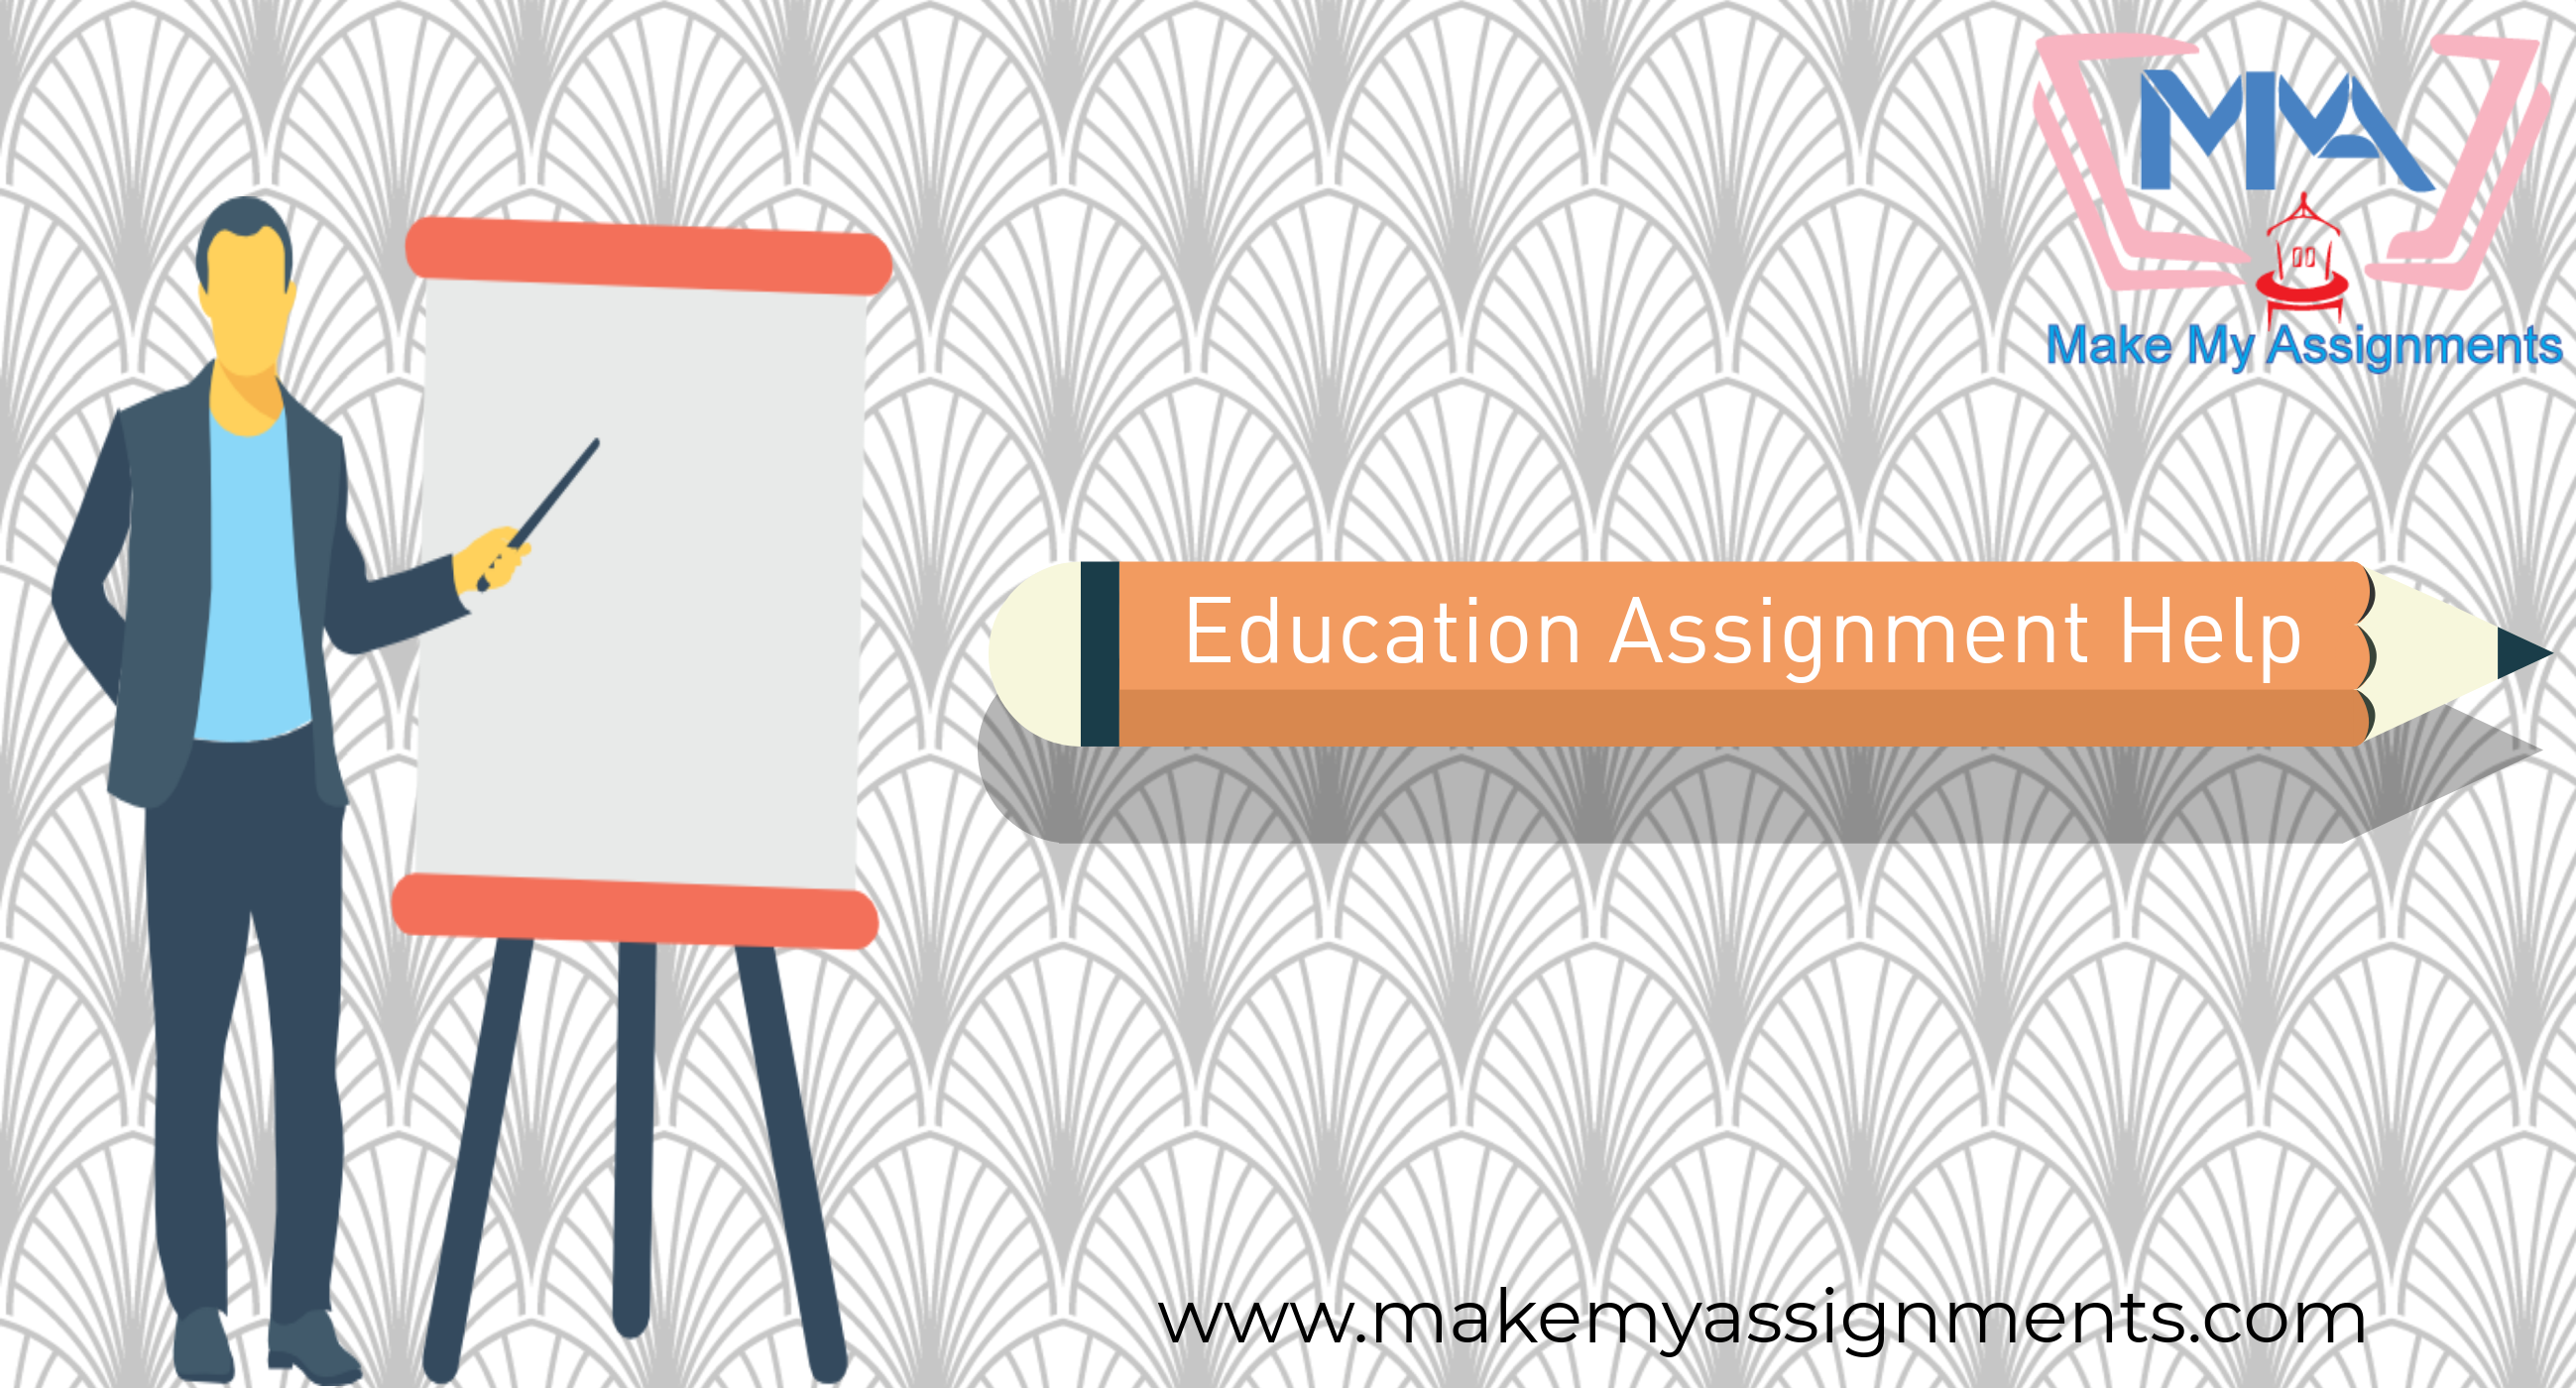 how to complete assignment easily